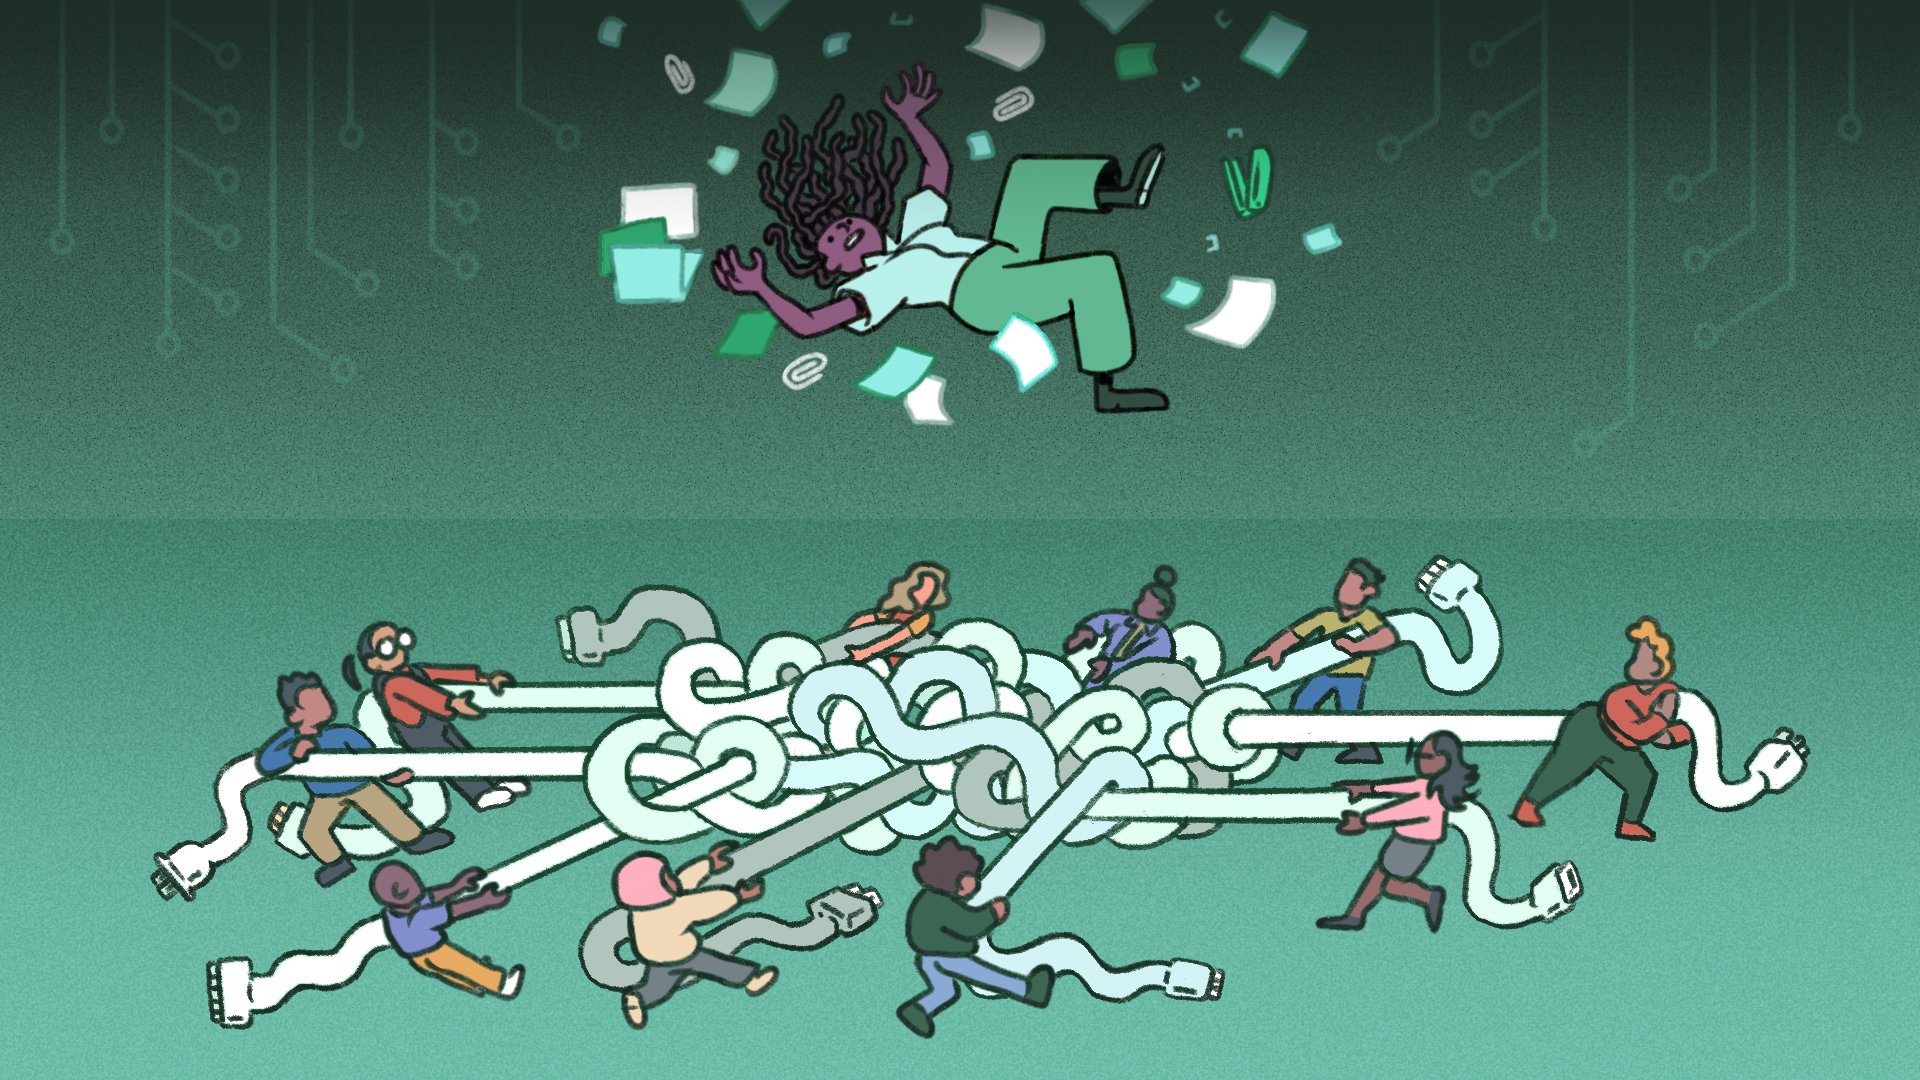 An illustration of a laid-off worker falling into a tangled net of cords and wires held by a supportive community